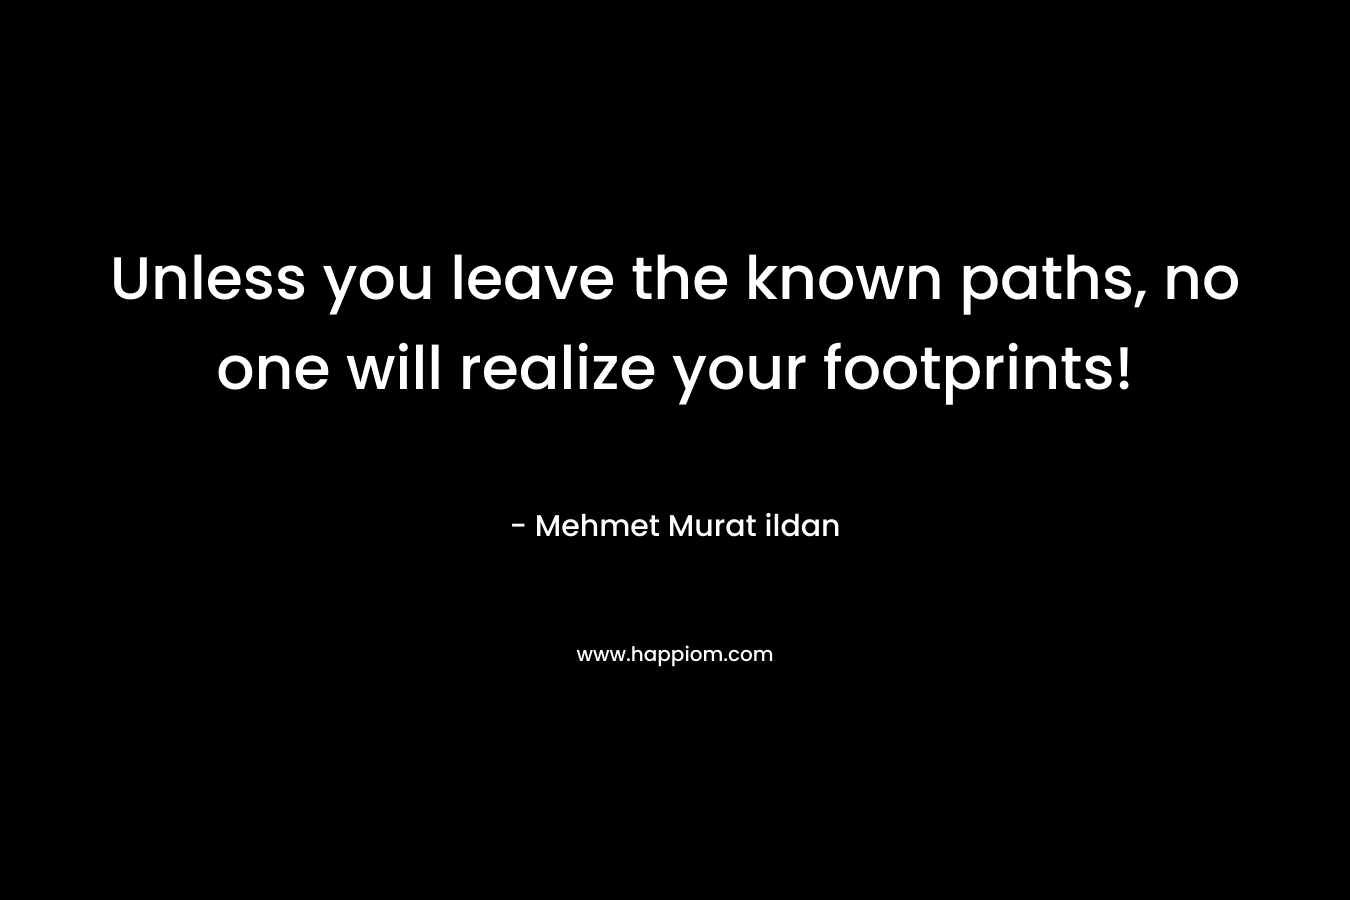 Unless you leave the known paths, no one will realize your footprints!